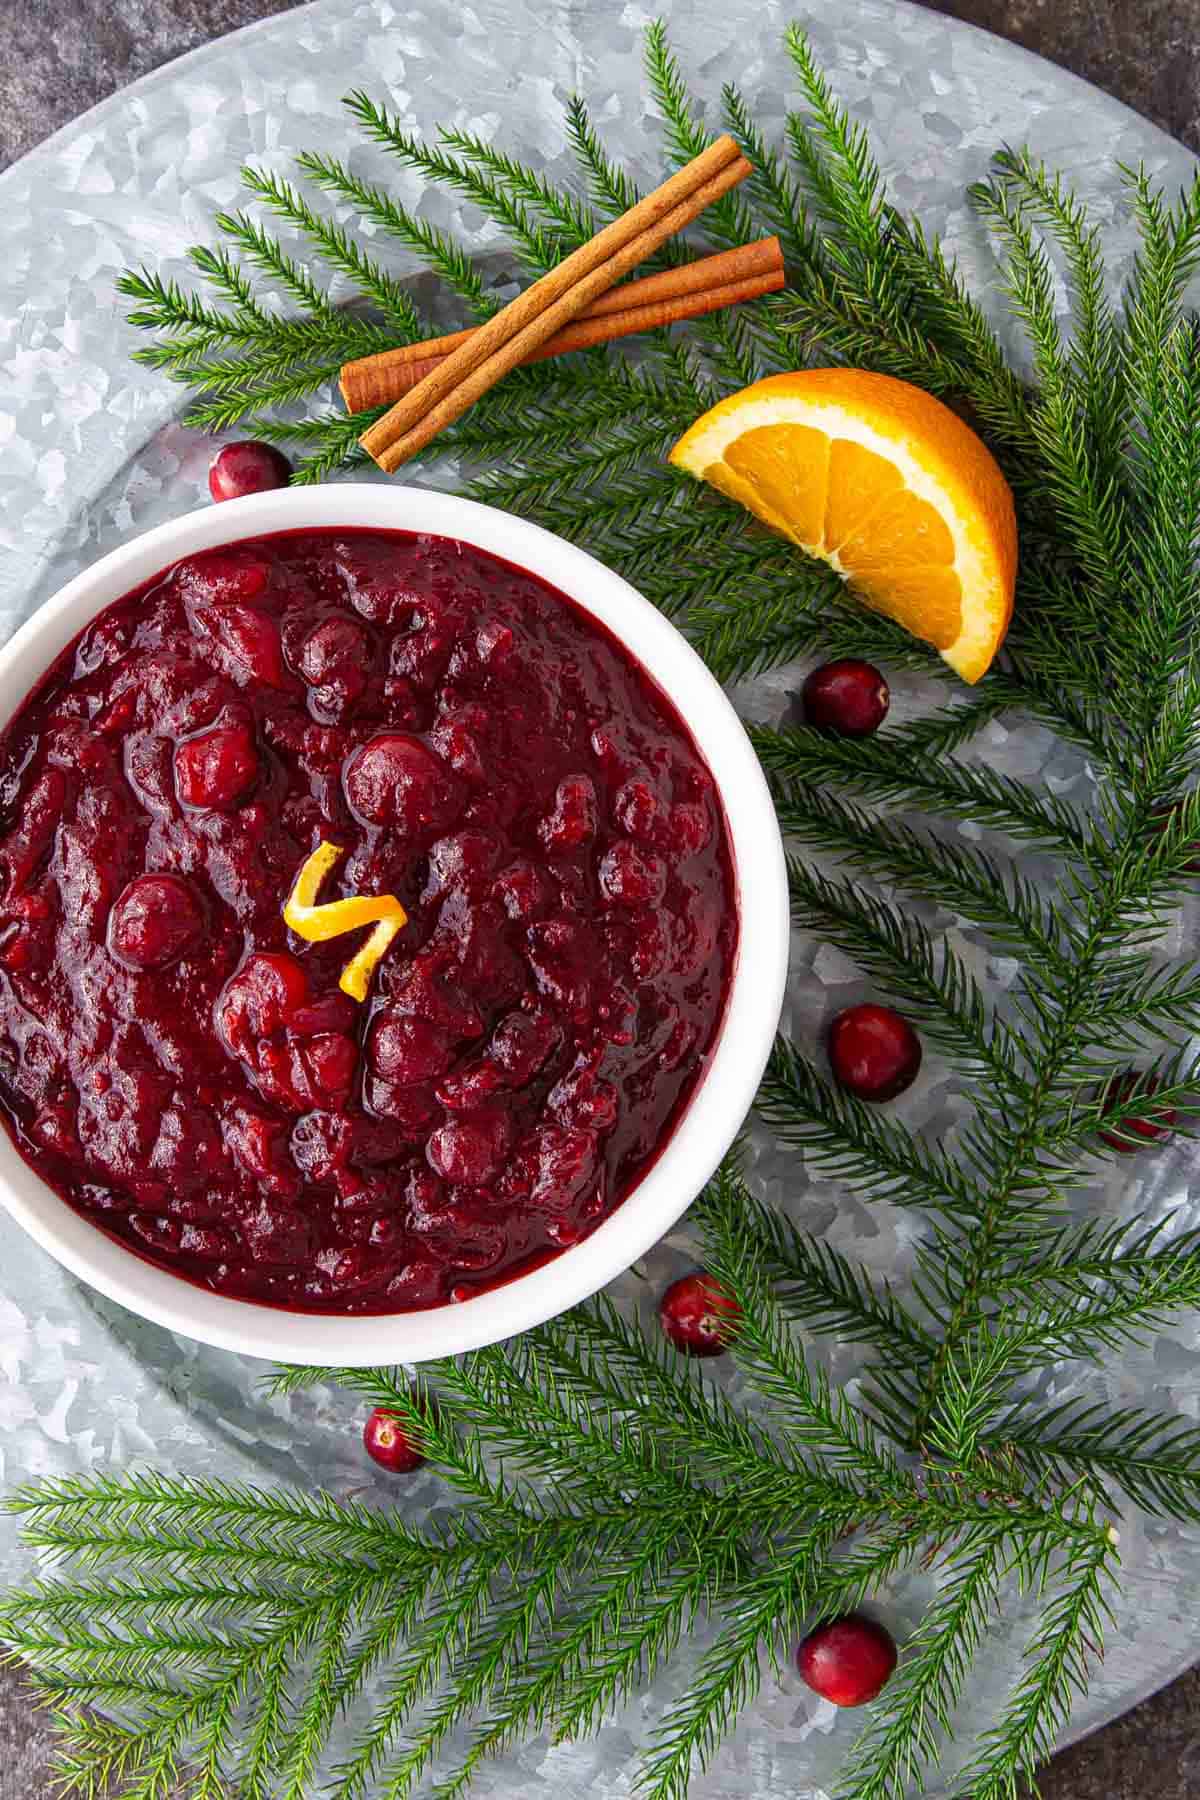 Overhead view of cranberry sauce on a platter with festive holiday greenery and fresh cranberries.